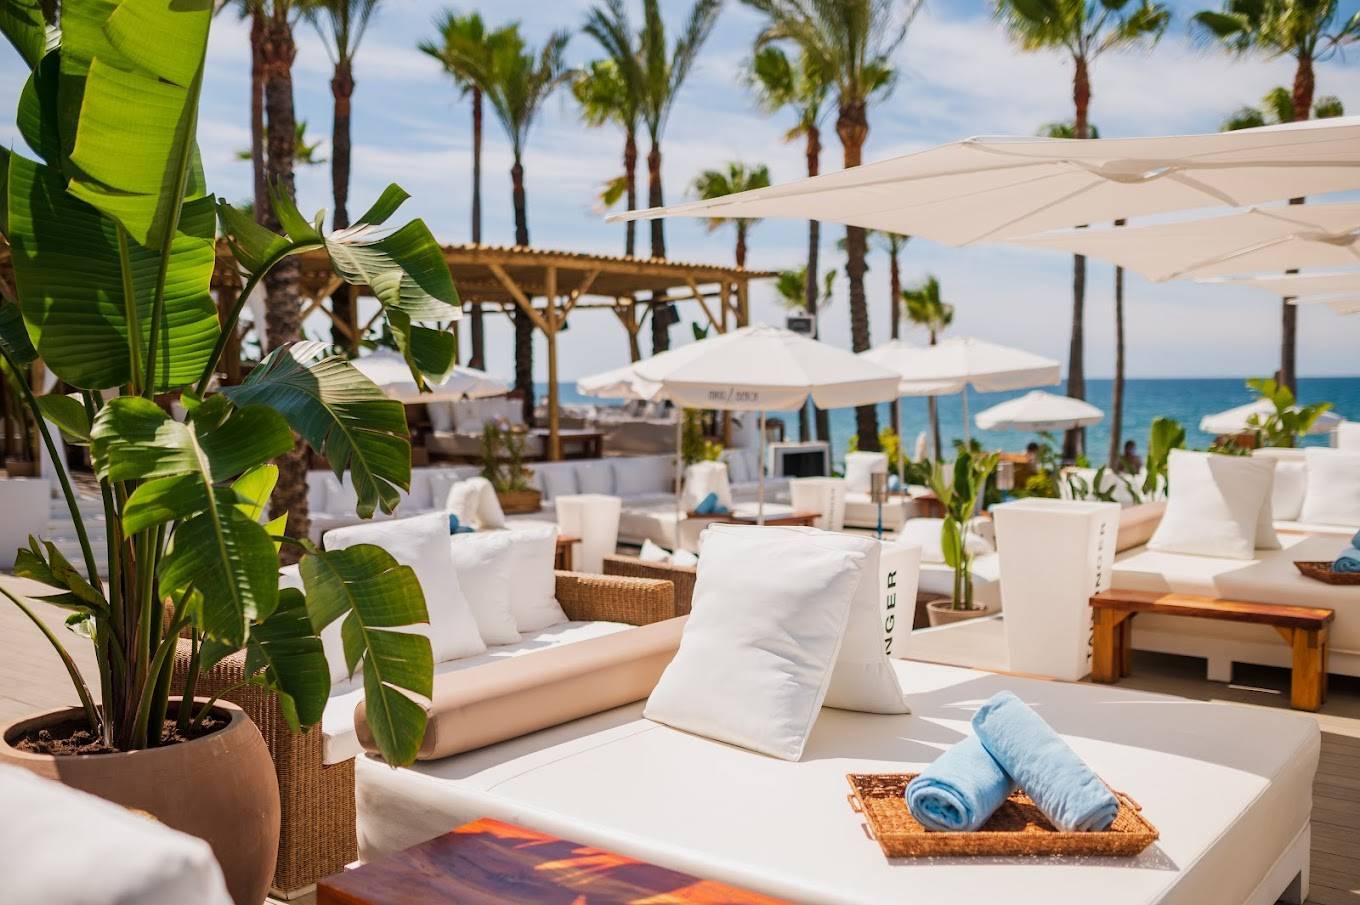 Gastronomic routes in Andalusia: unforgettable sensory experiences. Nikki beach